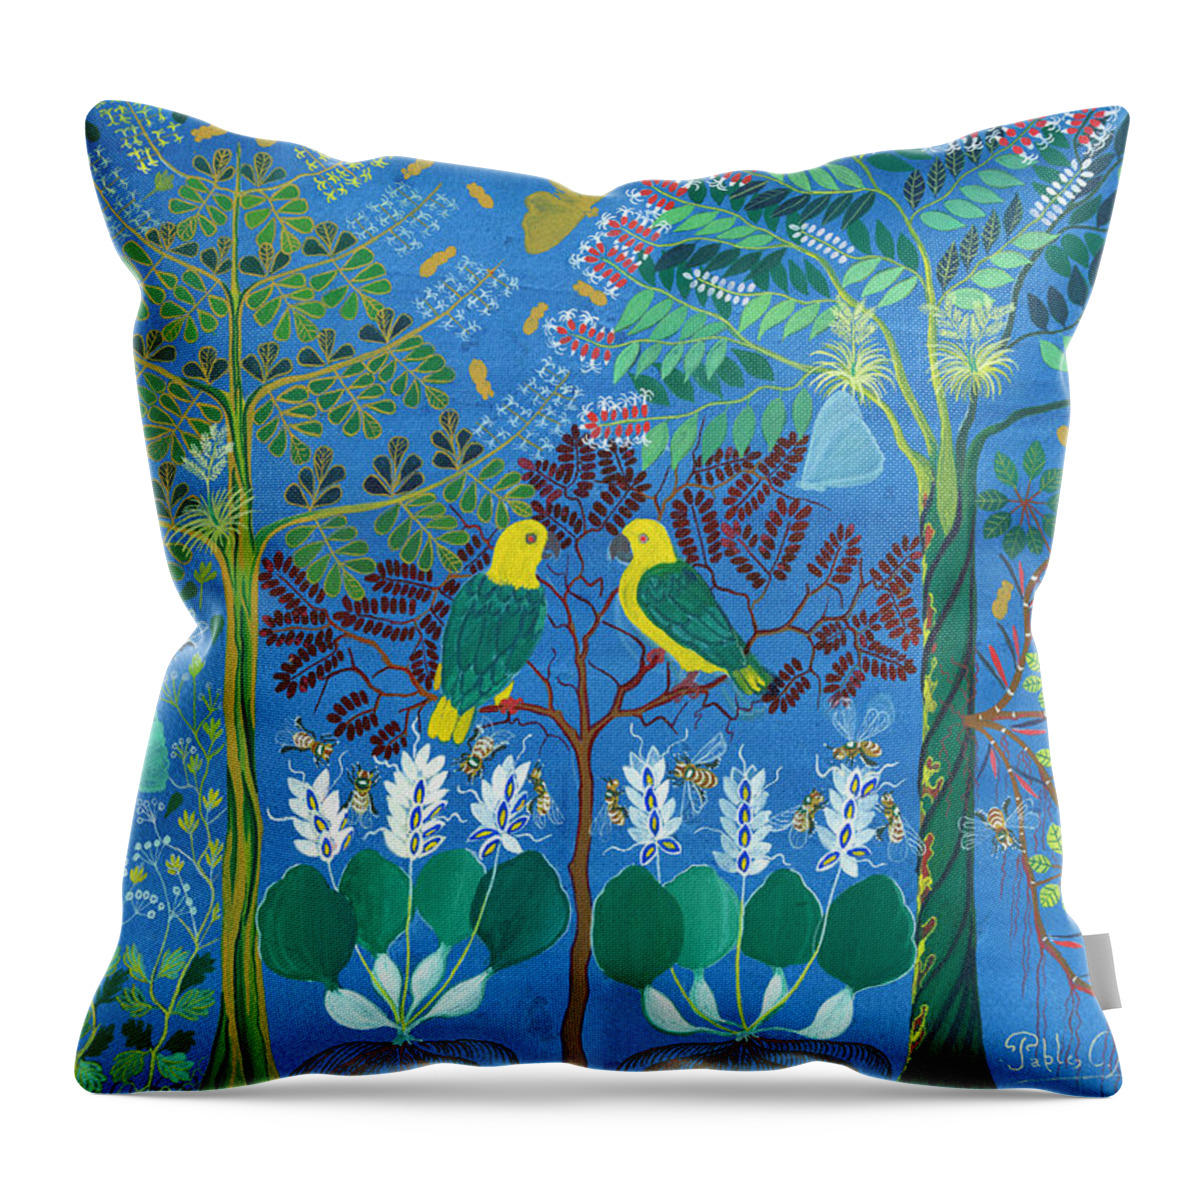  Throw Pillow featuring the painting Los Loros by Pablo Amaringo